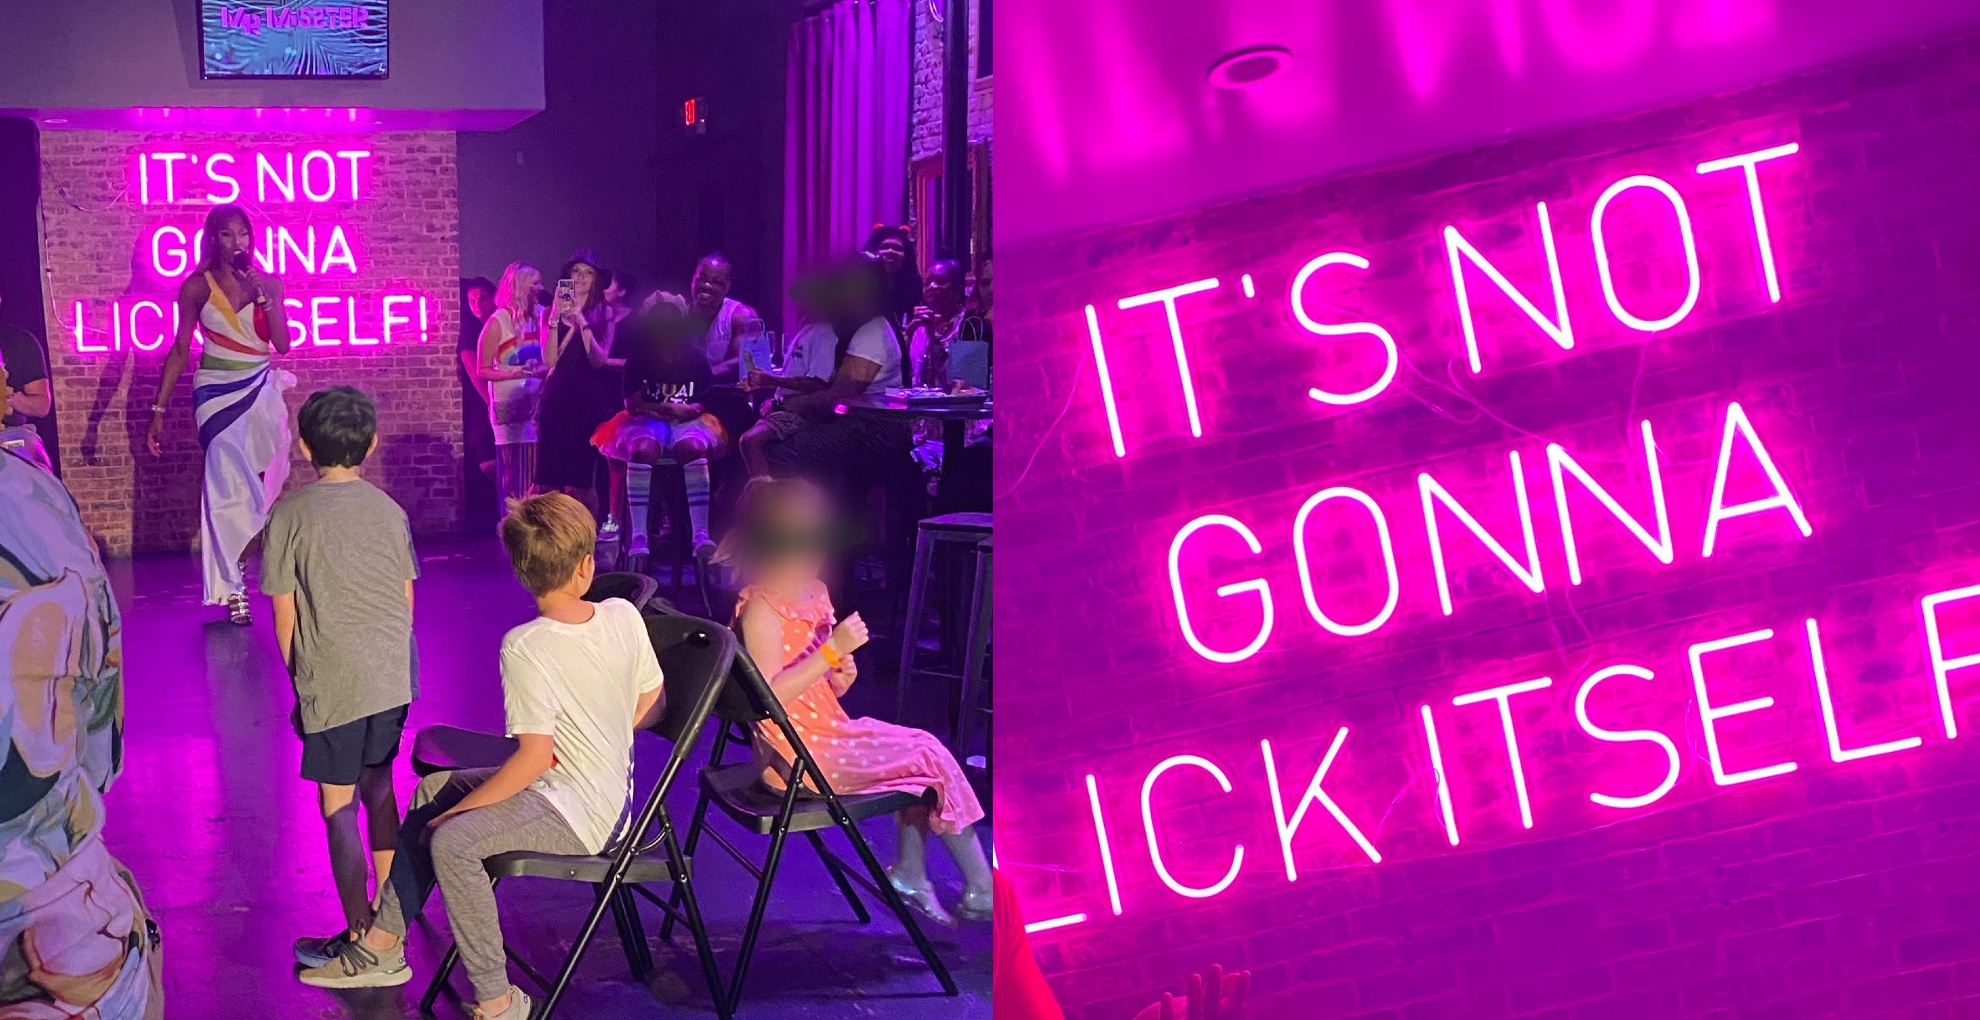 Children 'Tipped' Drag Queens During Performance at Gay Bar in Texas - Reduxx